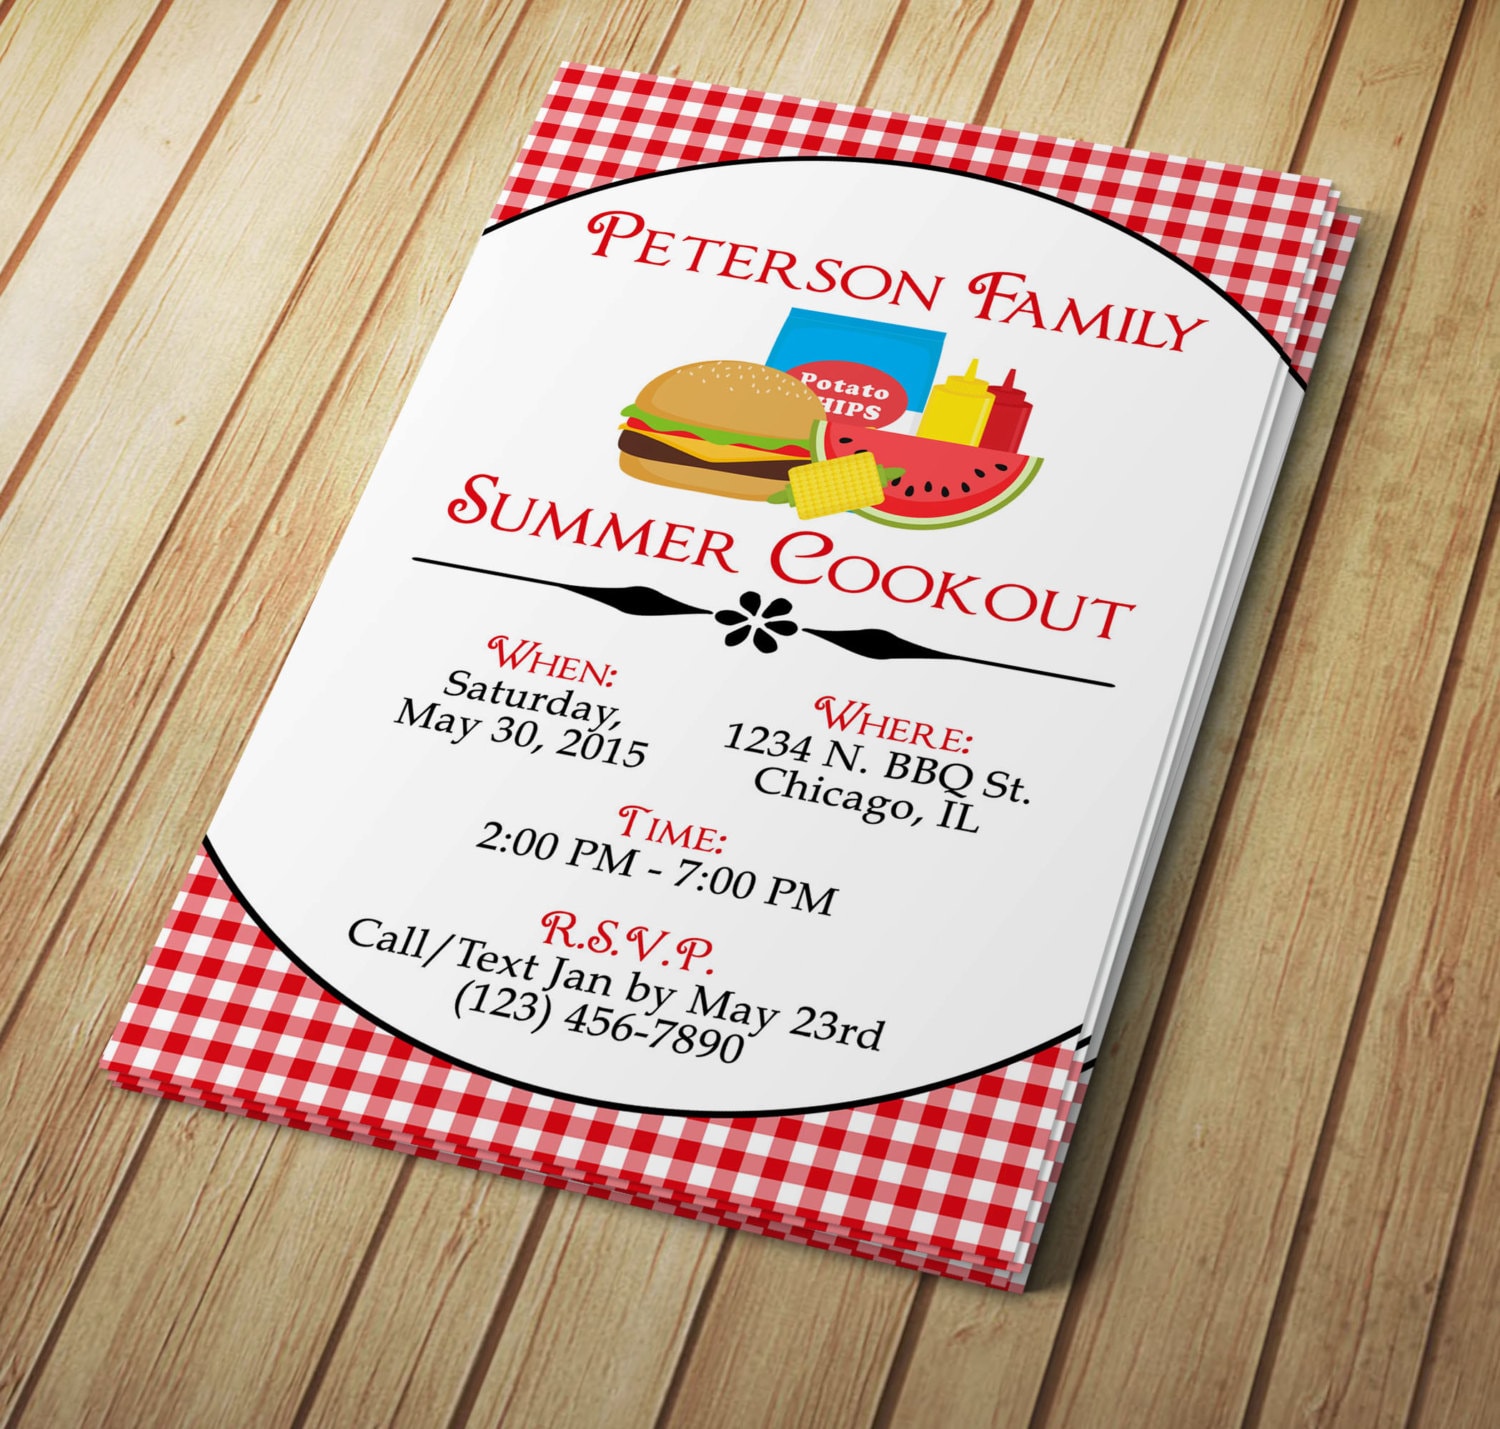 Summer Cookout Invitation Editable Template Microsoft Word